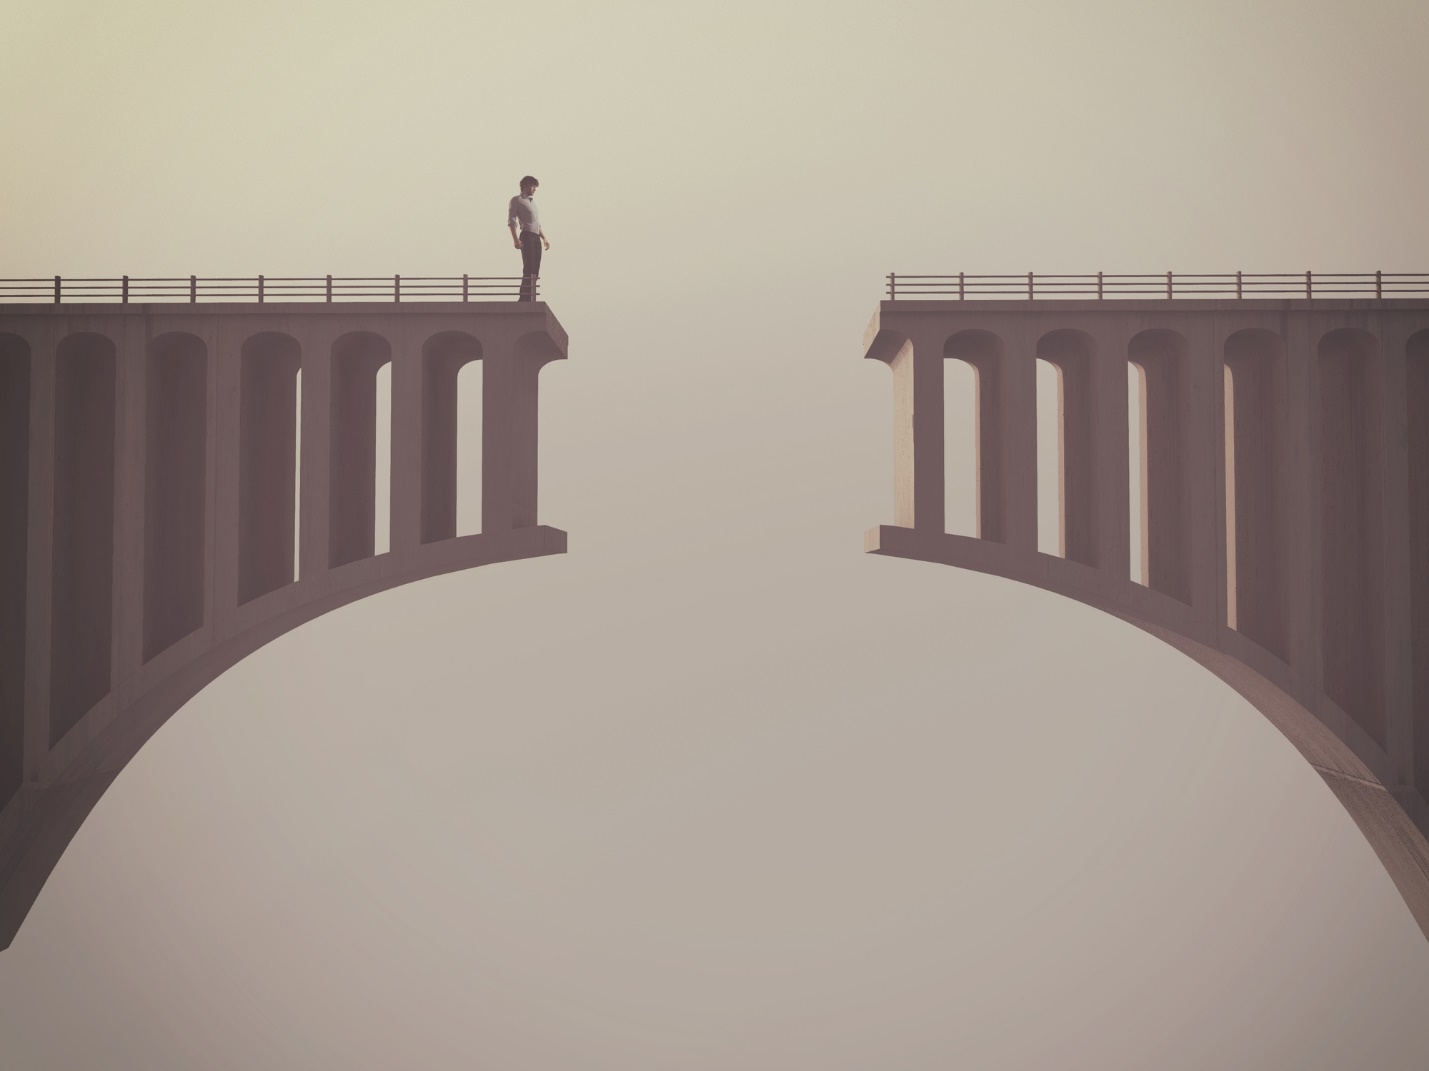 A person standing on a bridge

Description automatically generated with medium confidence